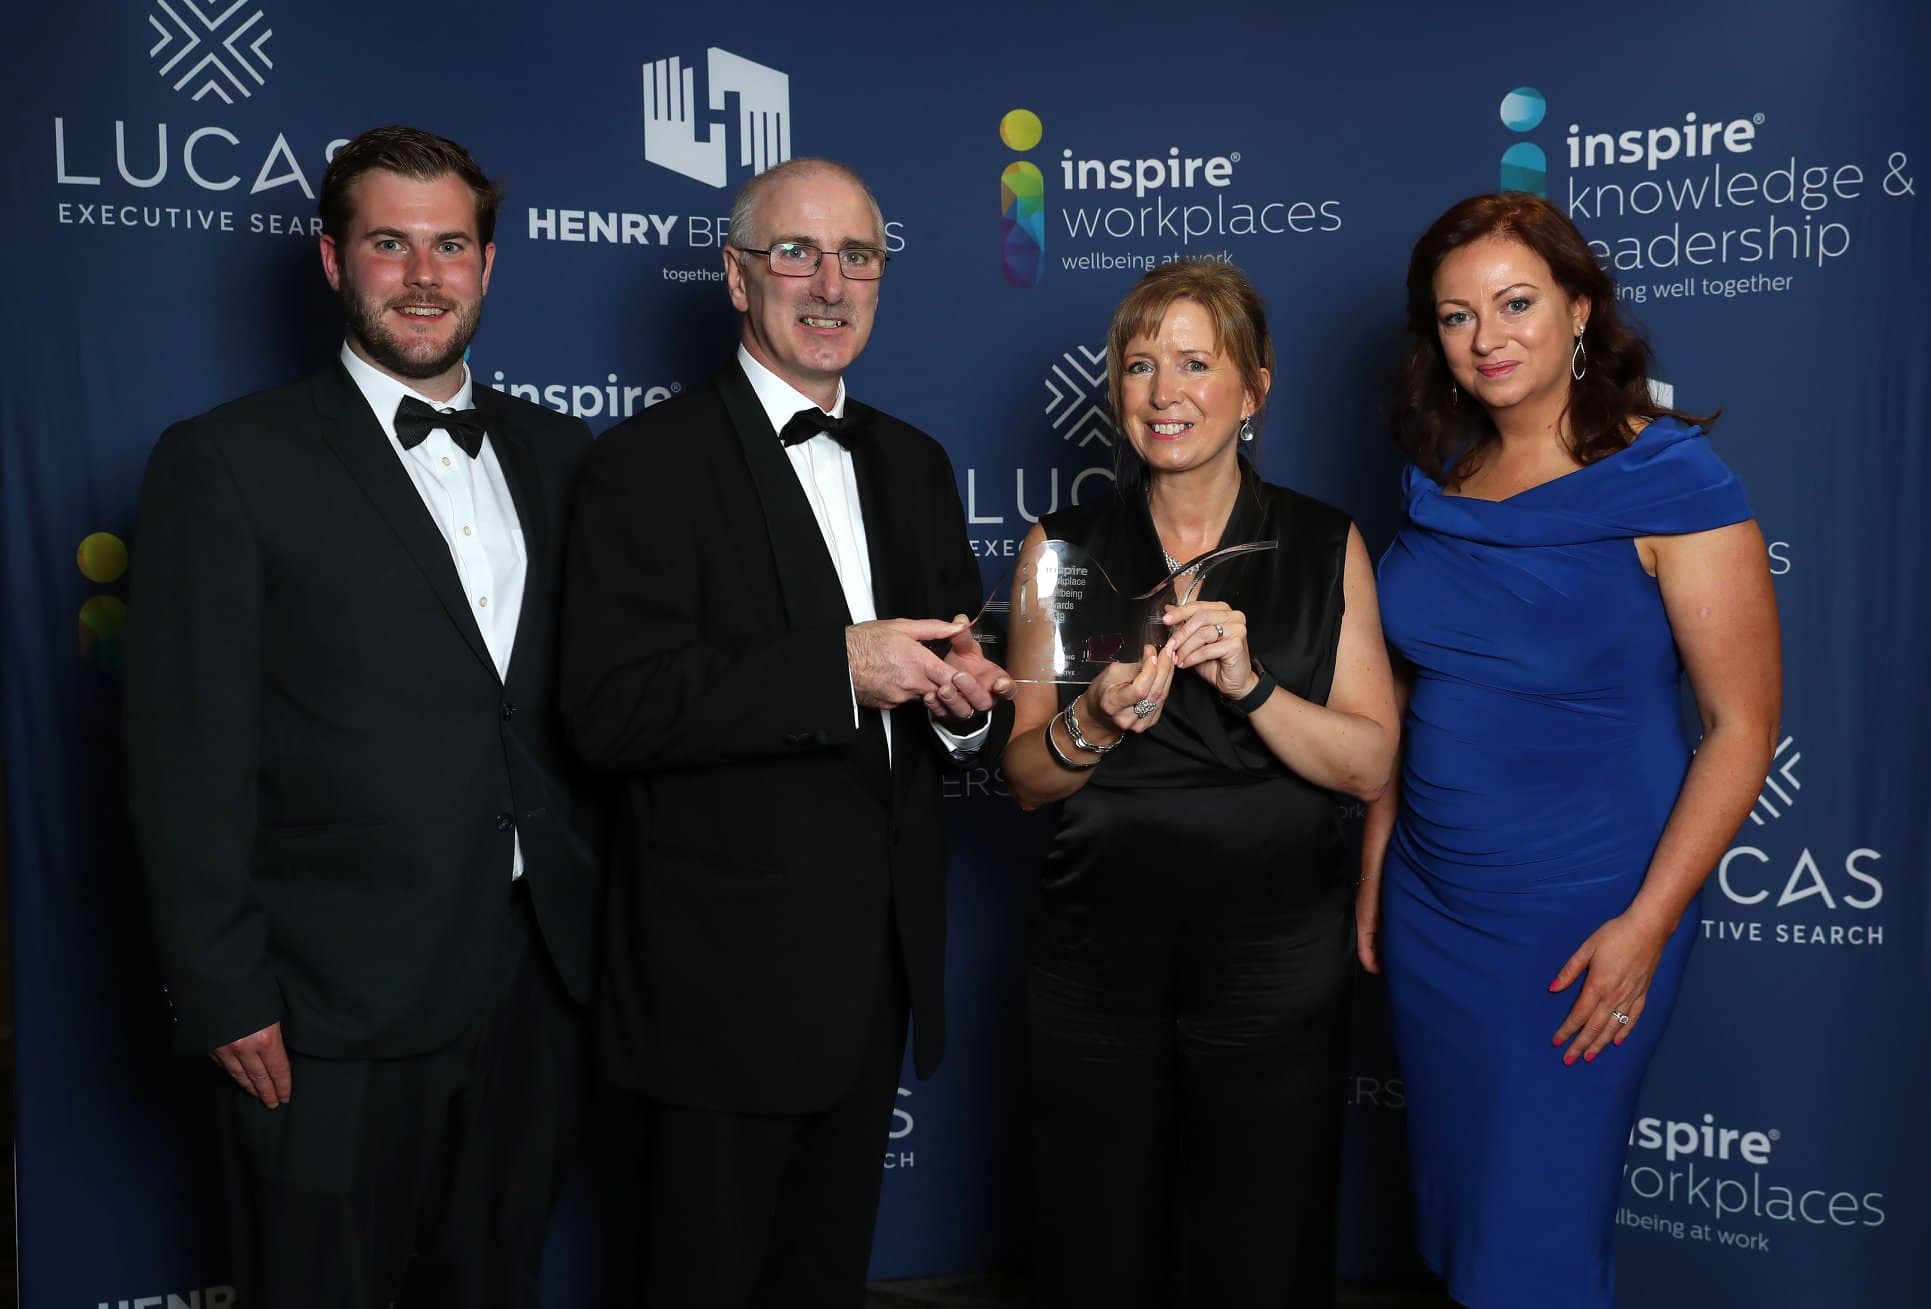 Sponsorship of Inspire Workplace Wellbeing Awards